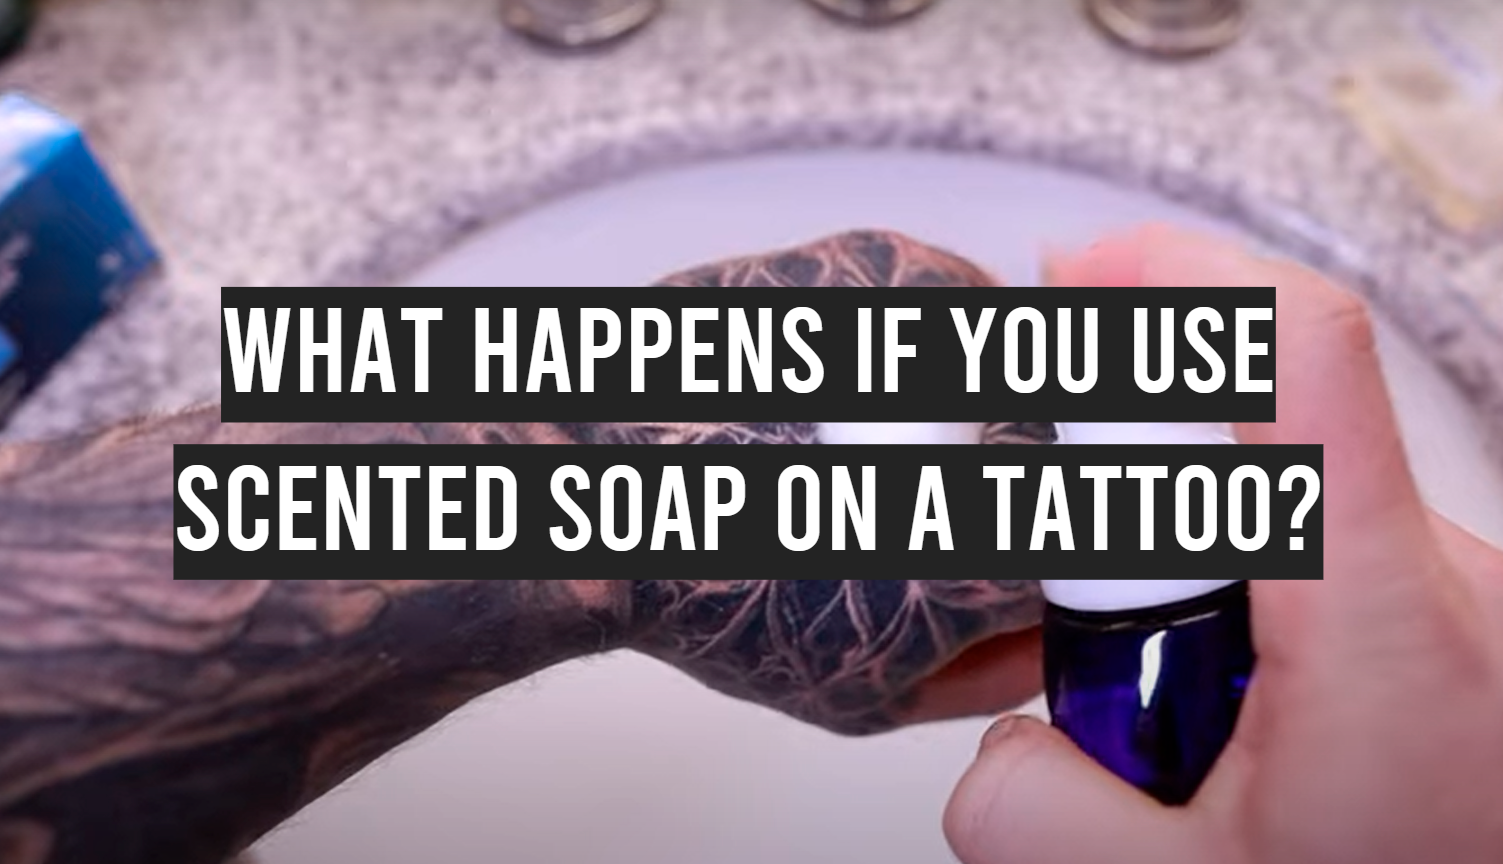 What Happens If You Use Scented Soap On a Tattoo?